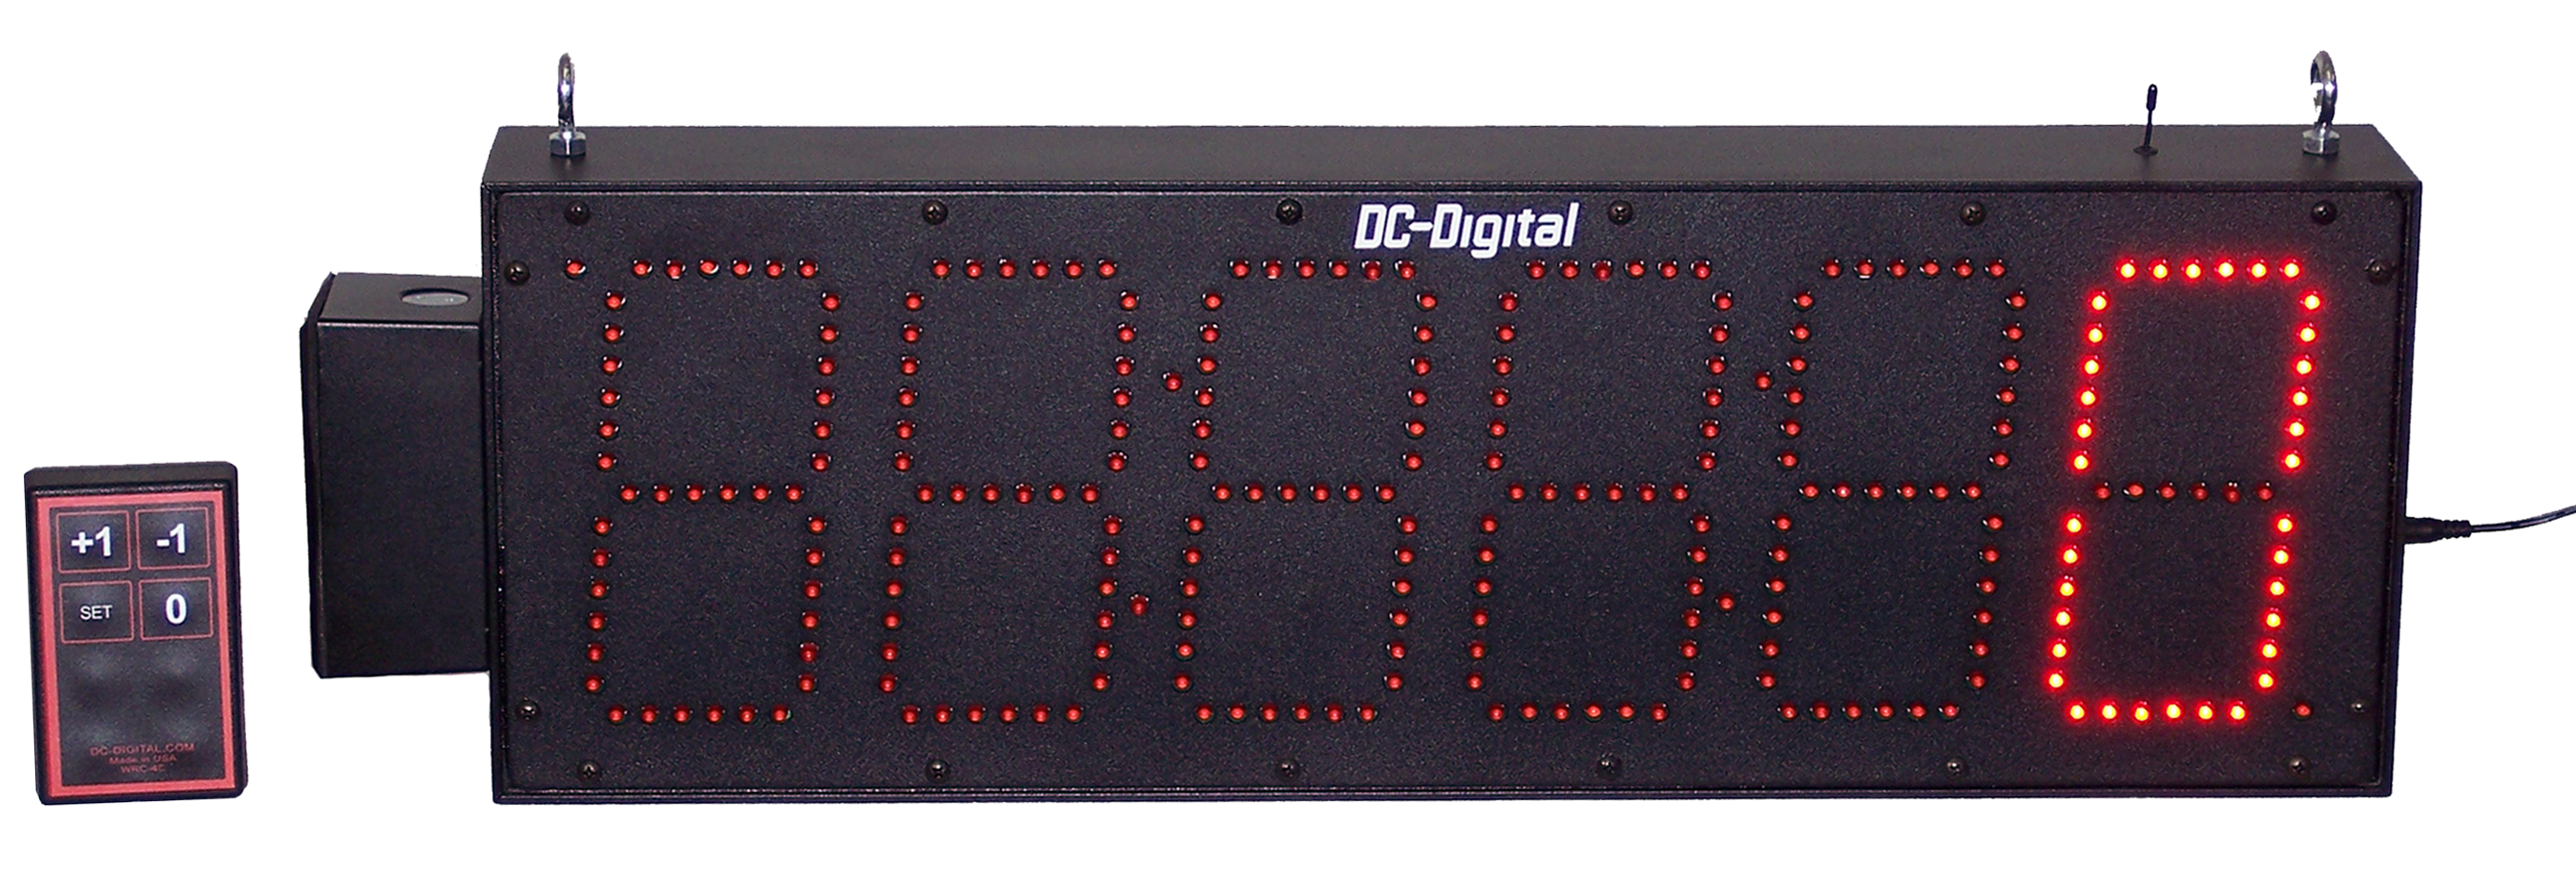 Dual control 6 digit unit counter PLC - Relay - Voltage Pulse input and wireless inputs